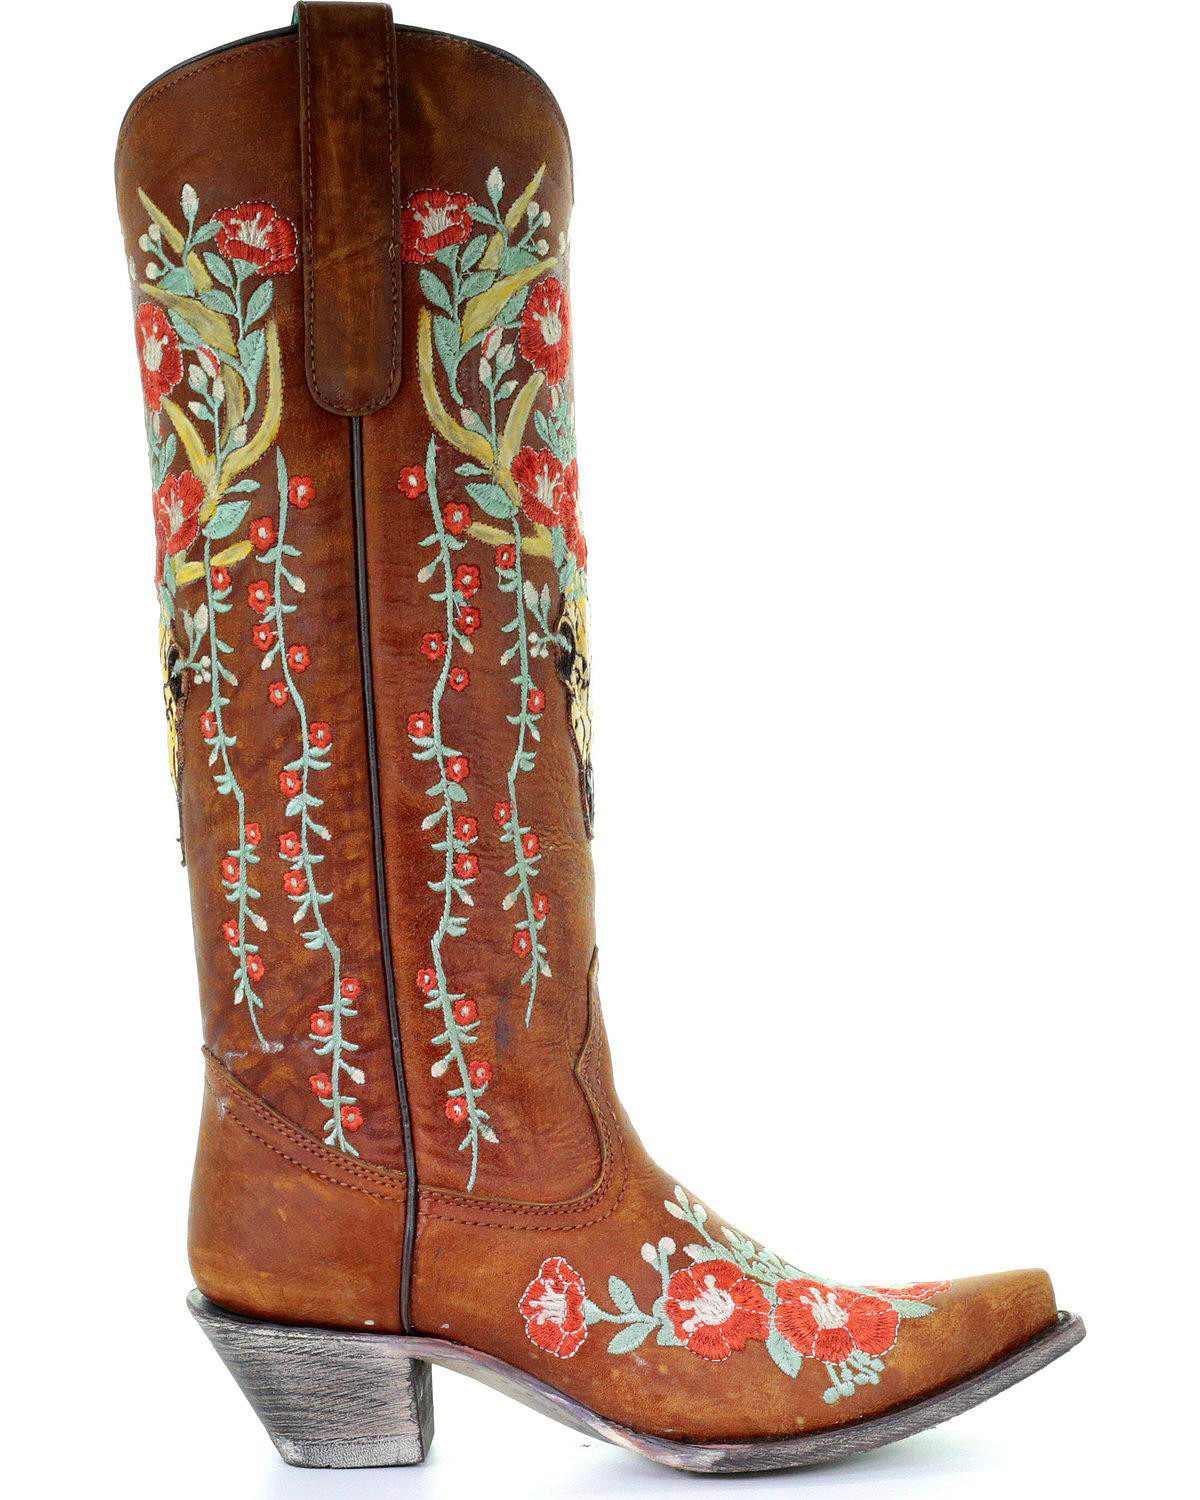 Corral Women's Deer Skull & Floral Embroidery Cowgirl Boots - Snip Toe ...